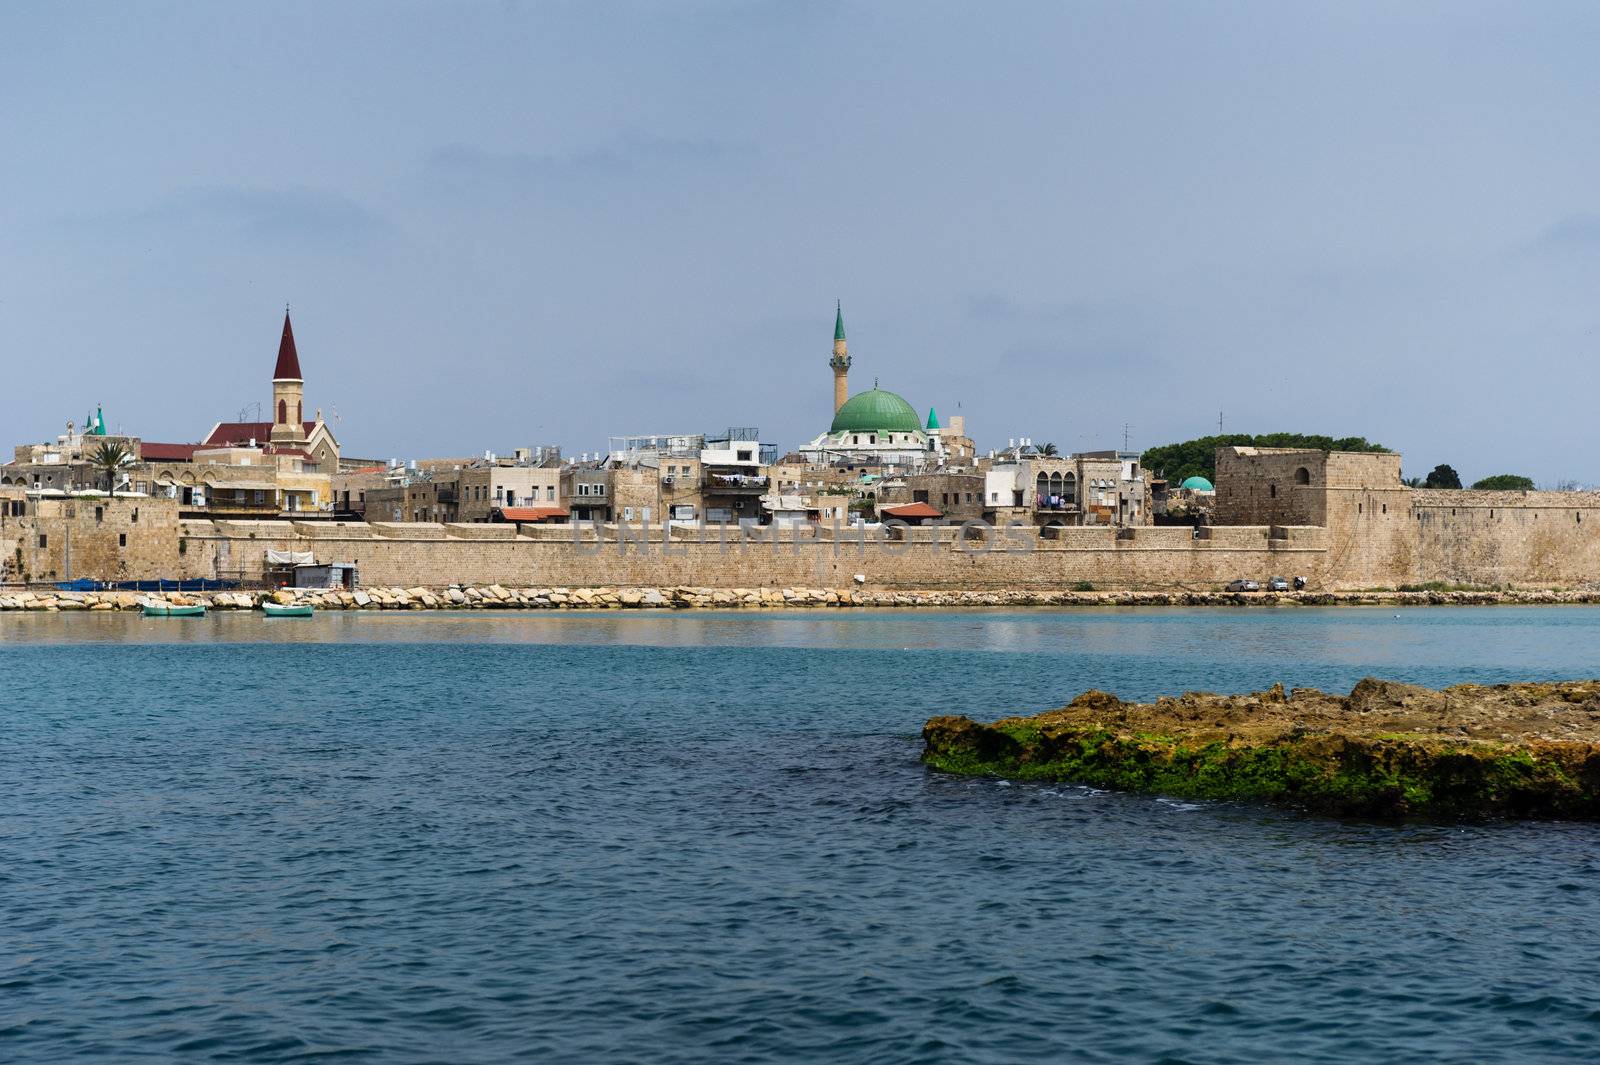 View on the ancient walls, houses and mosque in old town of Akko, Israel